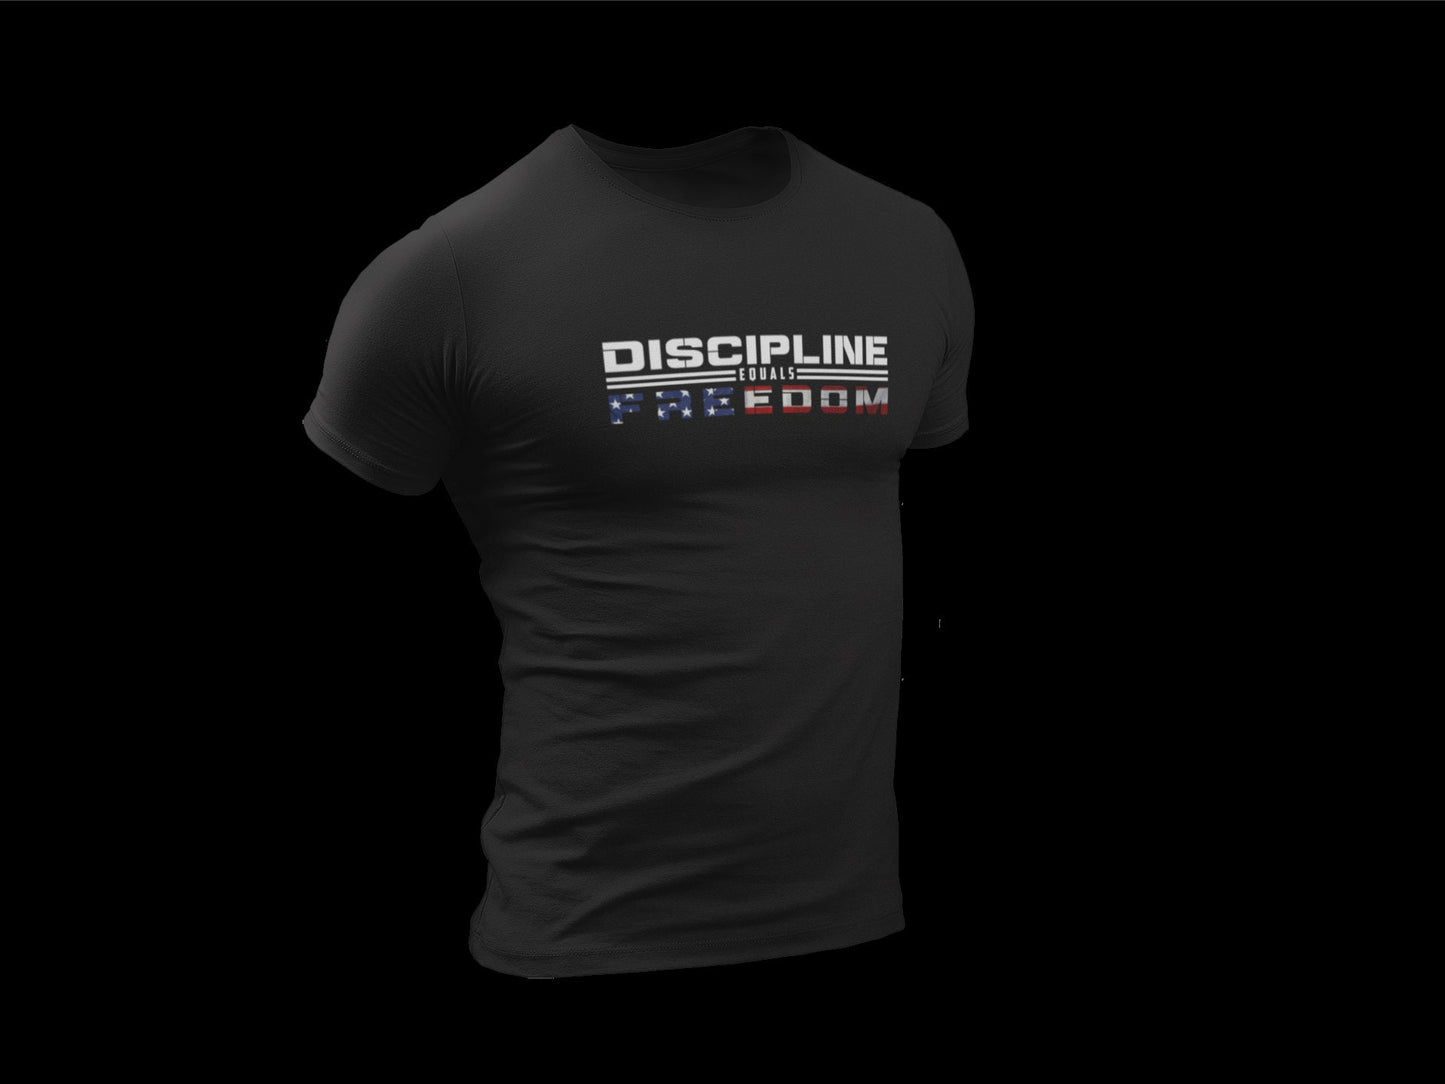 LIMITED EDITION Discipline Equals Freedom - Jocko Willink Inspired Navy Seal Army Graphic T Shirt